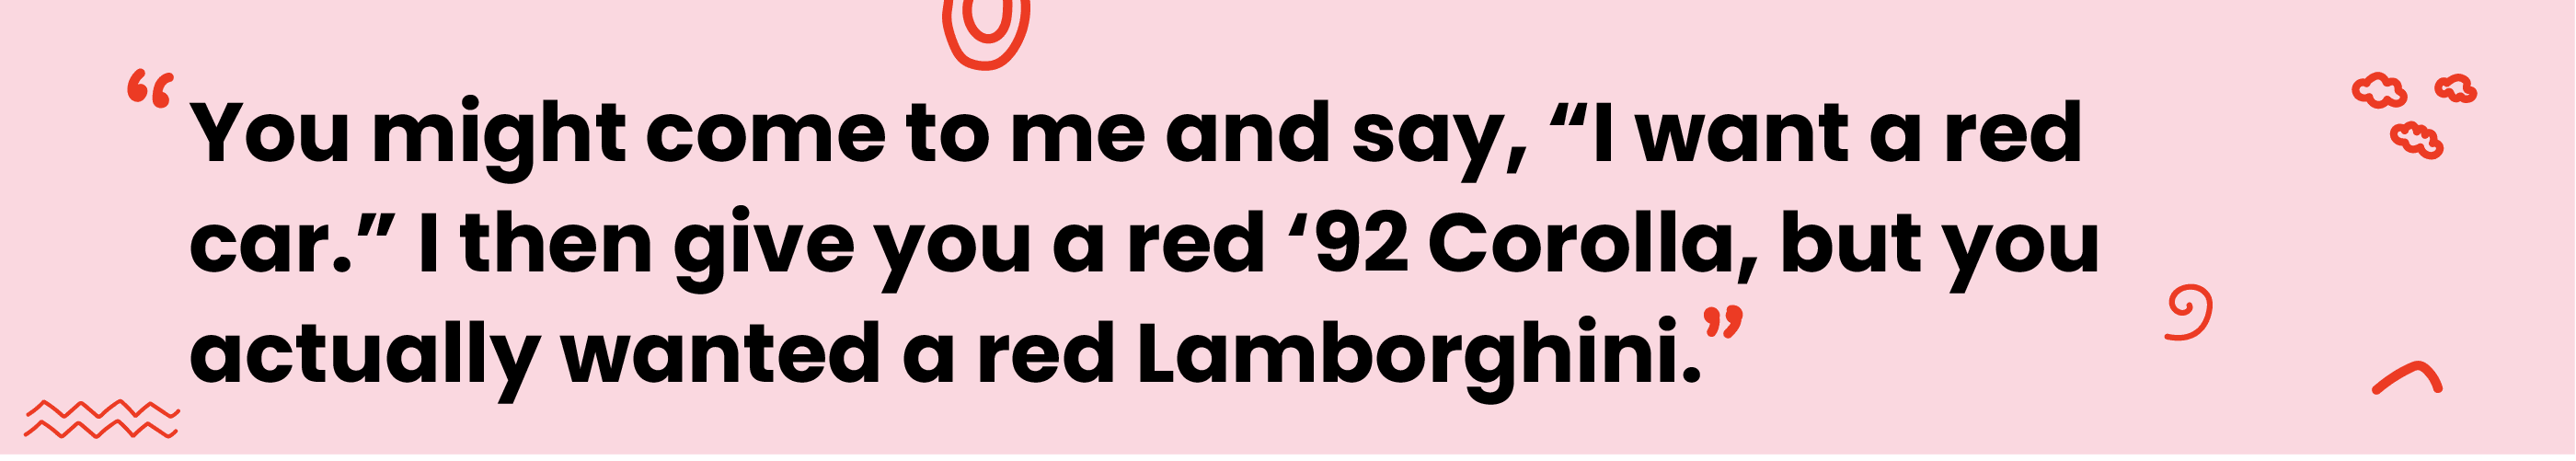 Quote reads "you might come to me and say, “I want a red car.” I then give you a red ‘92 Corolla, but you actually wanted a red Lamborghini"